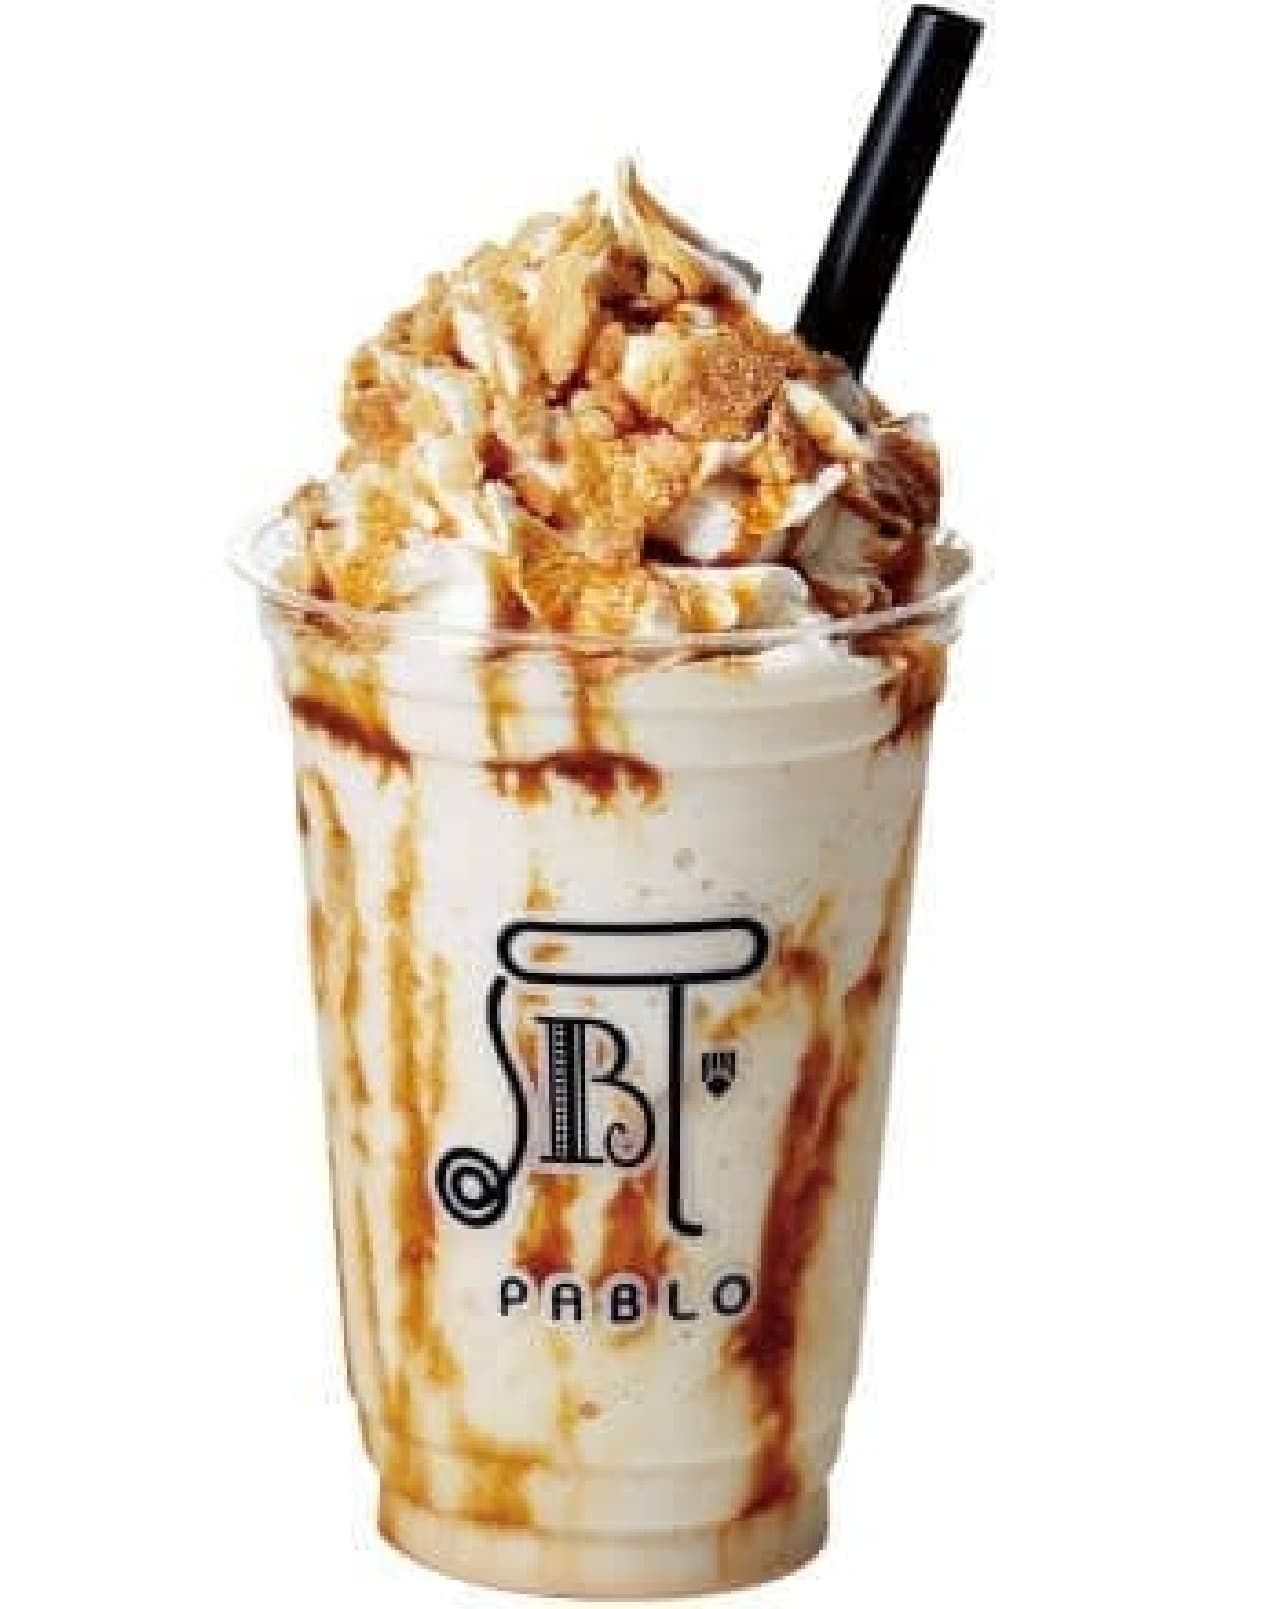 "Pablo Smoothie Apple Pie" is a smoothie with the image of an apple pie.